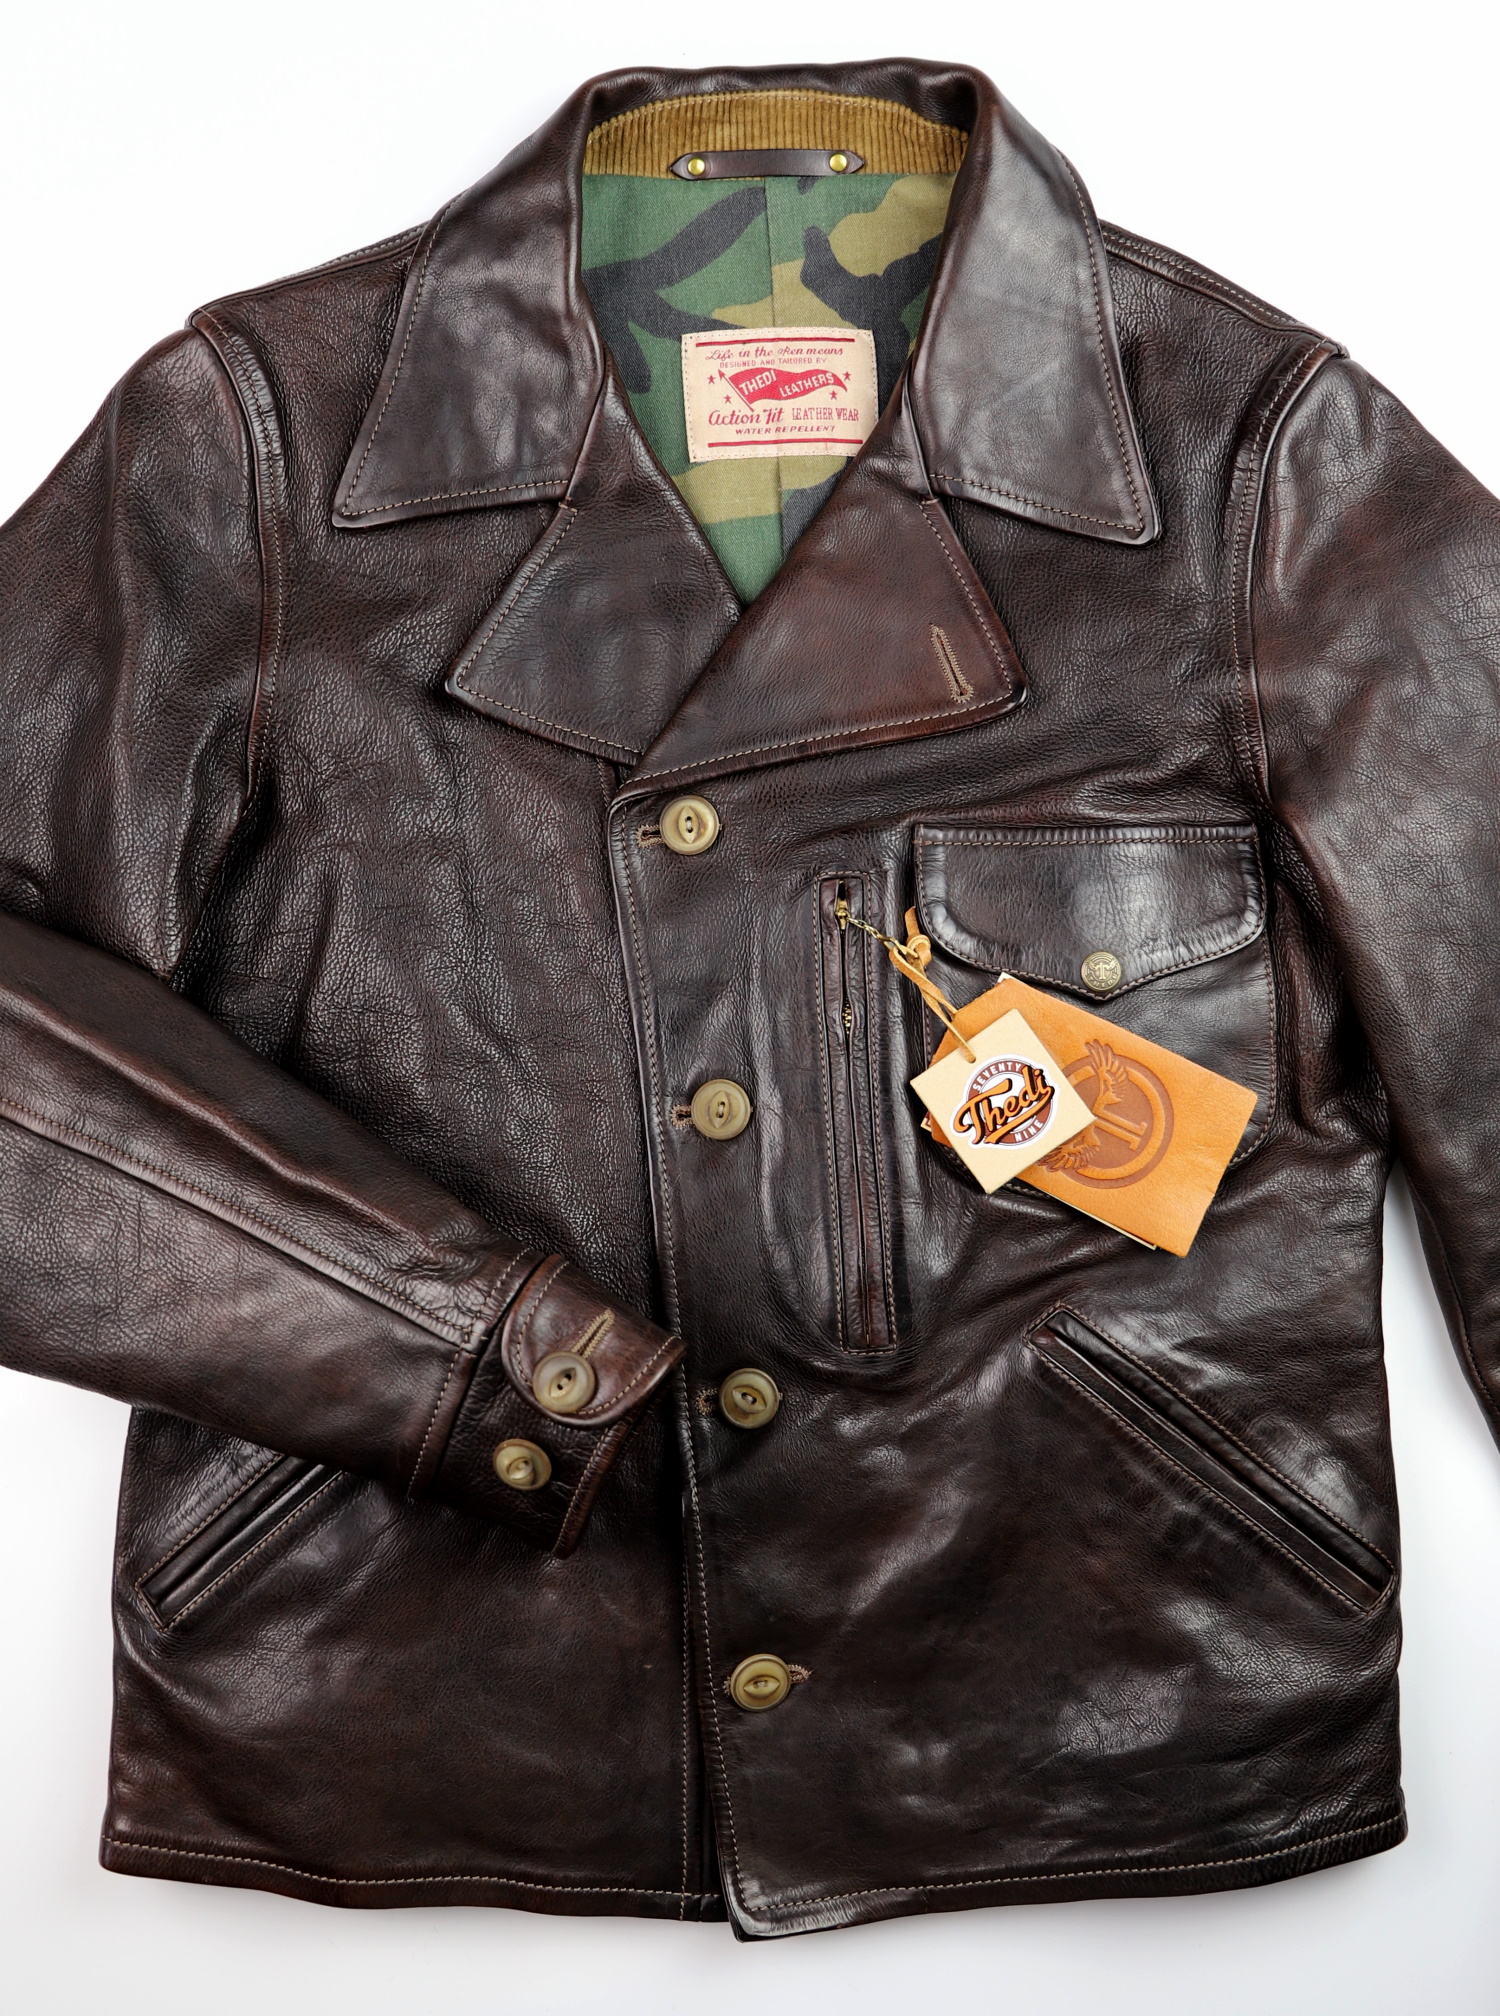 Thedi Hektor Brown Canneto Cowhide M1 front.jpg